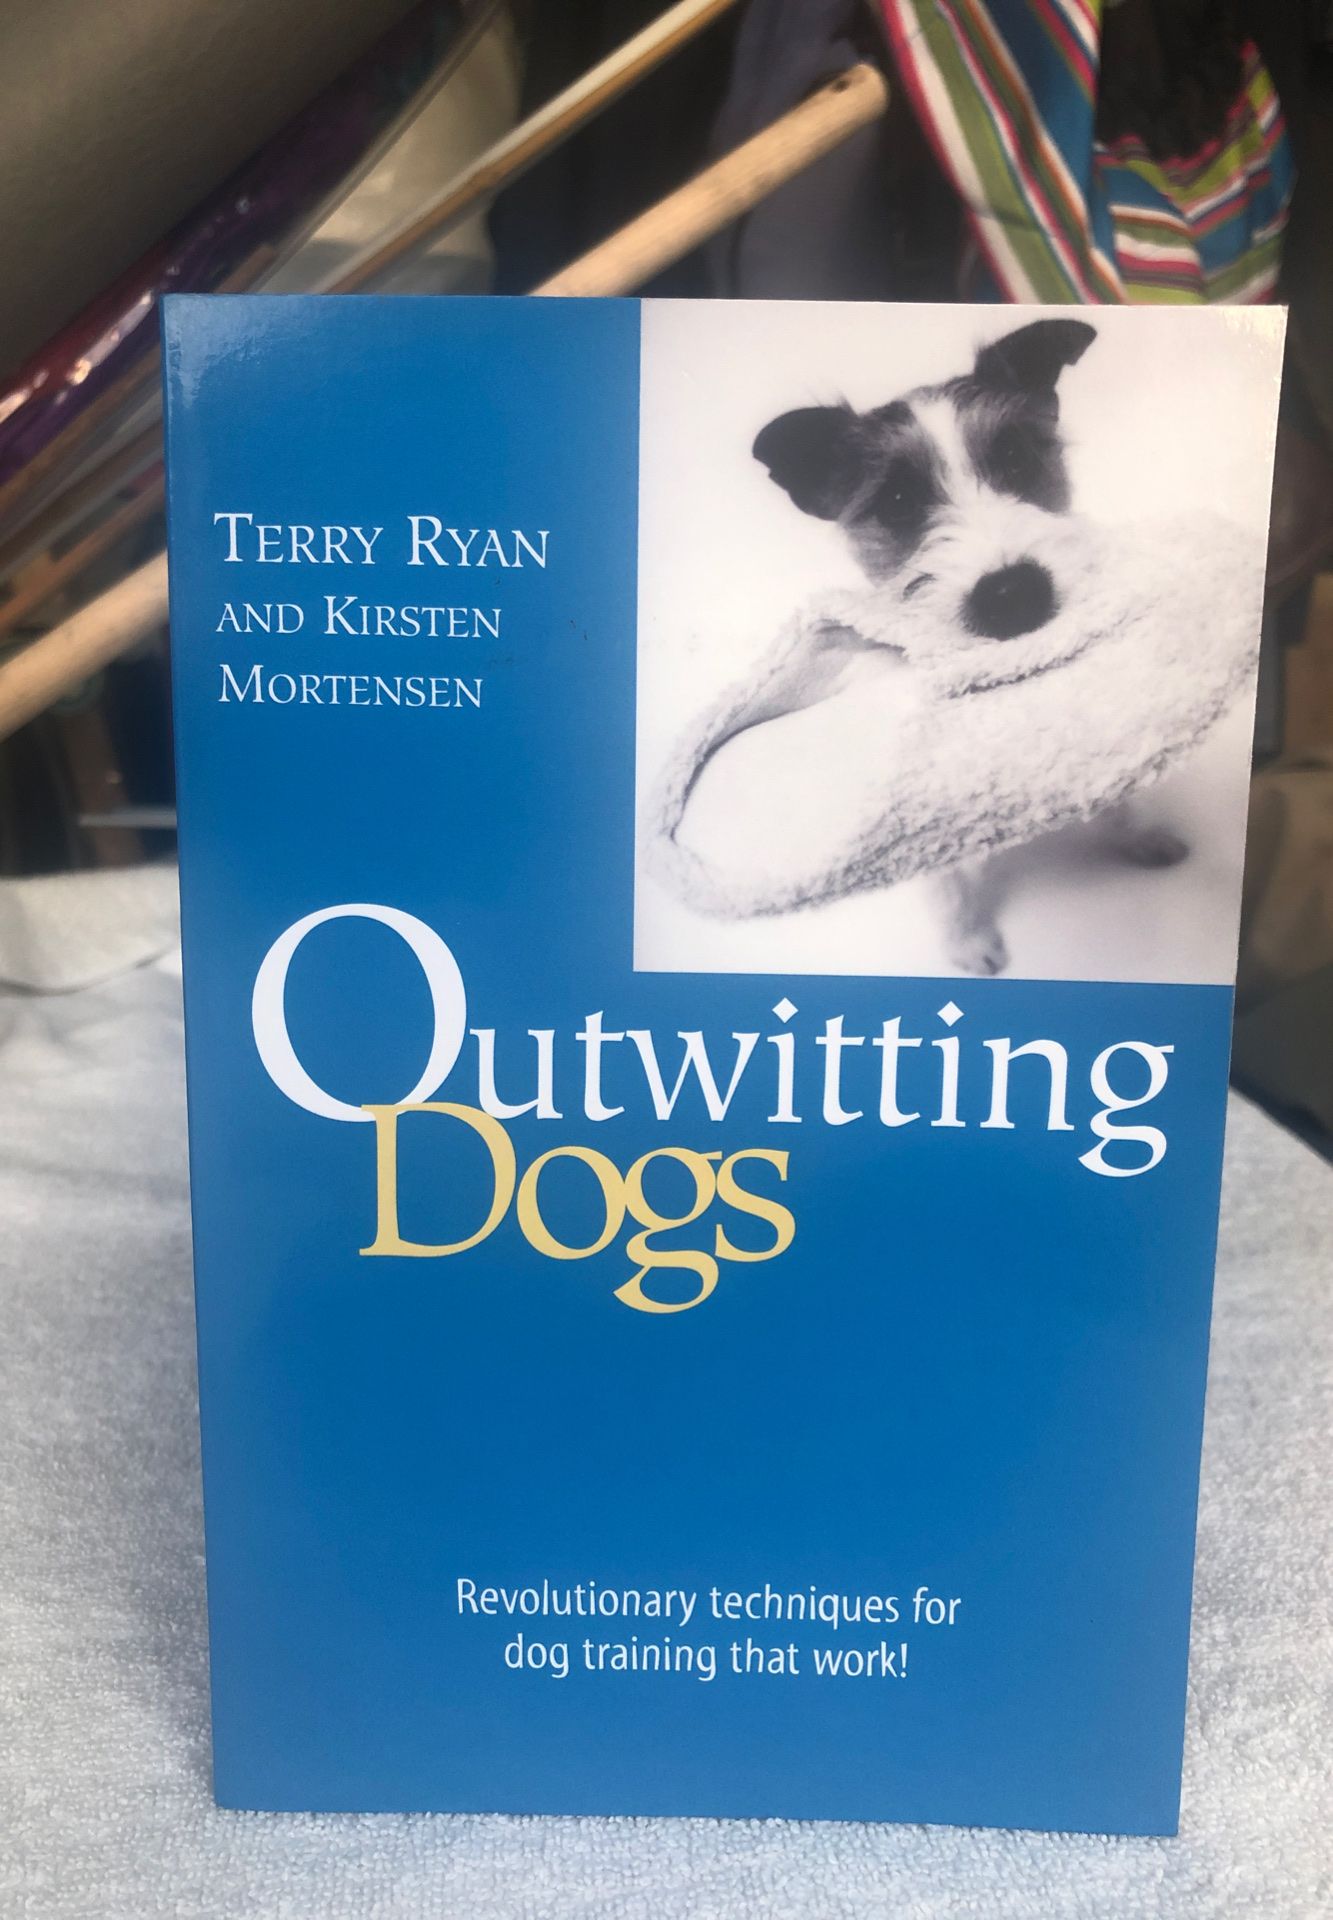 Outwitting Dogs - Training Techniques